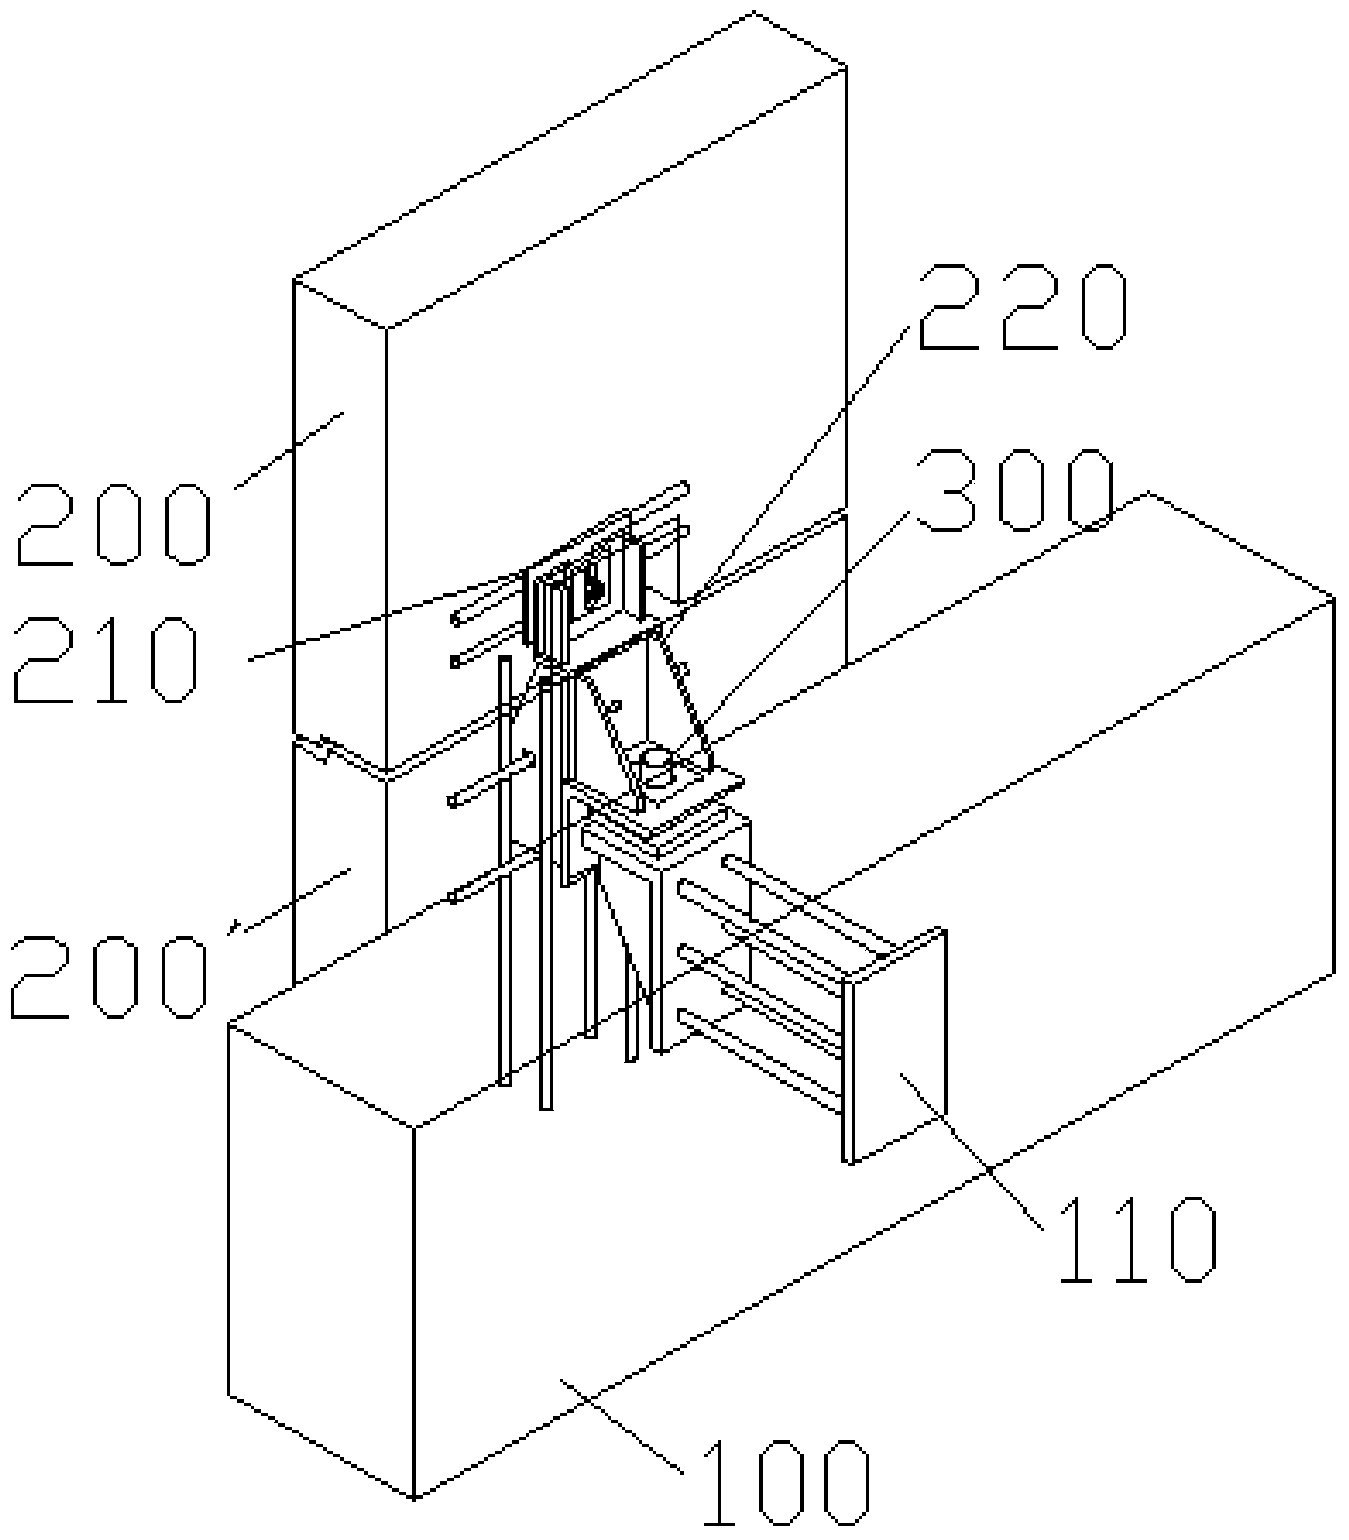 Hidden two-in-one dry type connection joint for prefabricated externally-hung wallboards